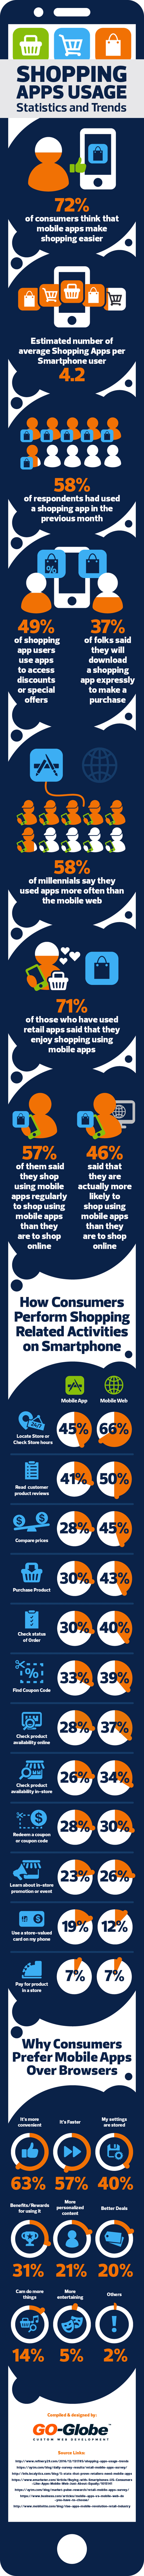 Shopping apps usage - Statistics and Trends